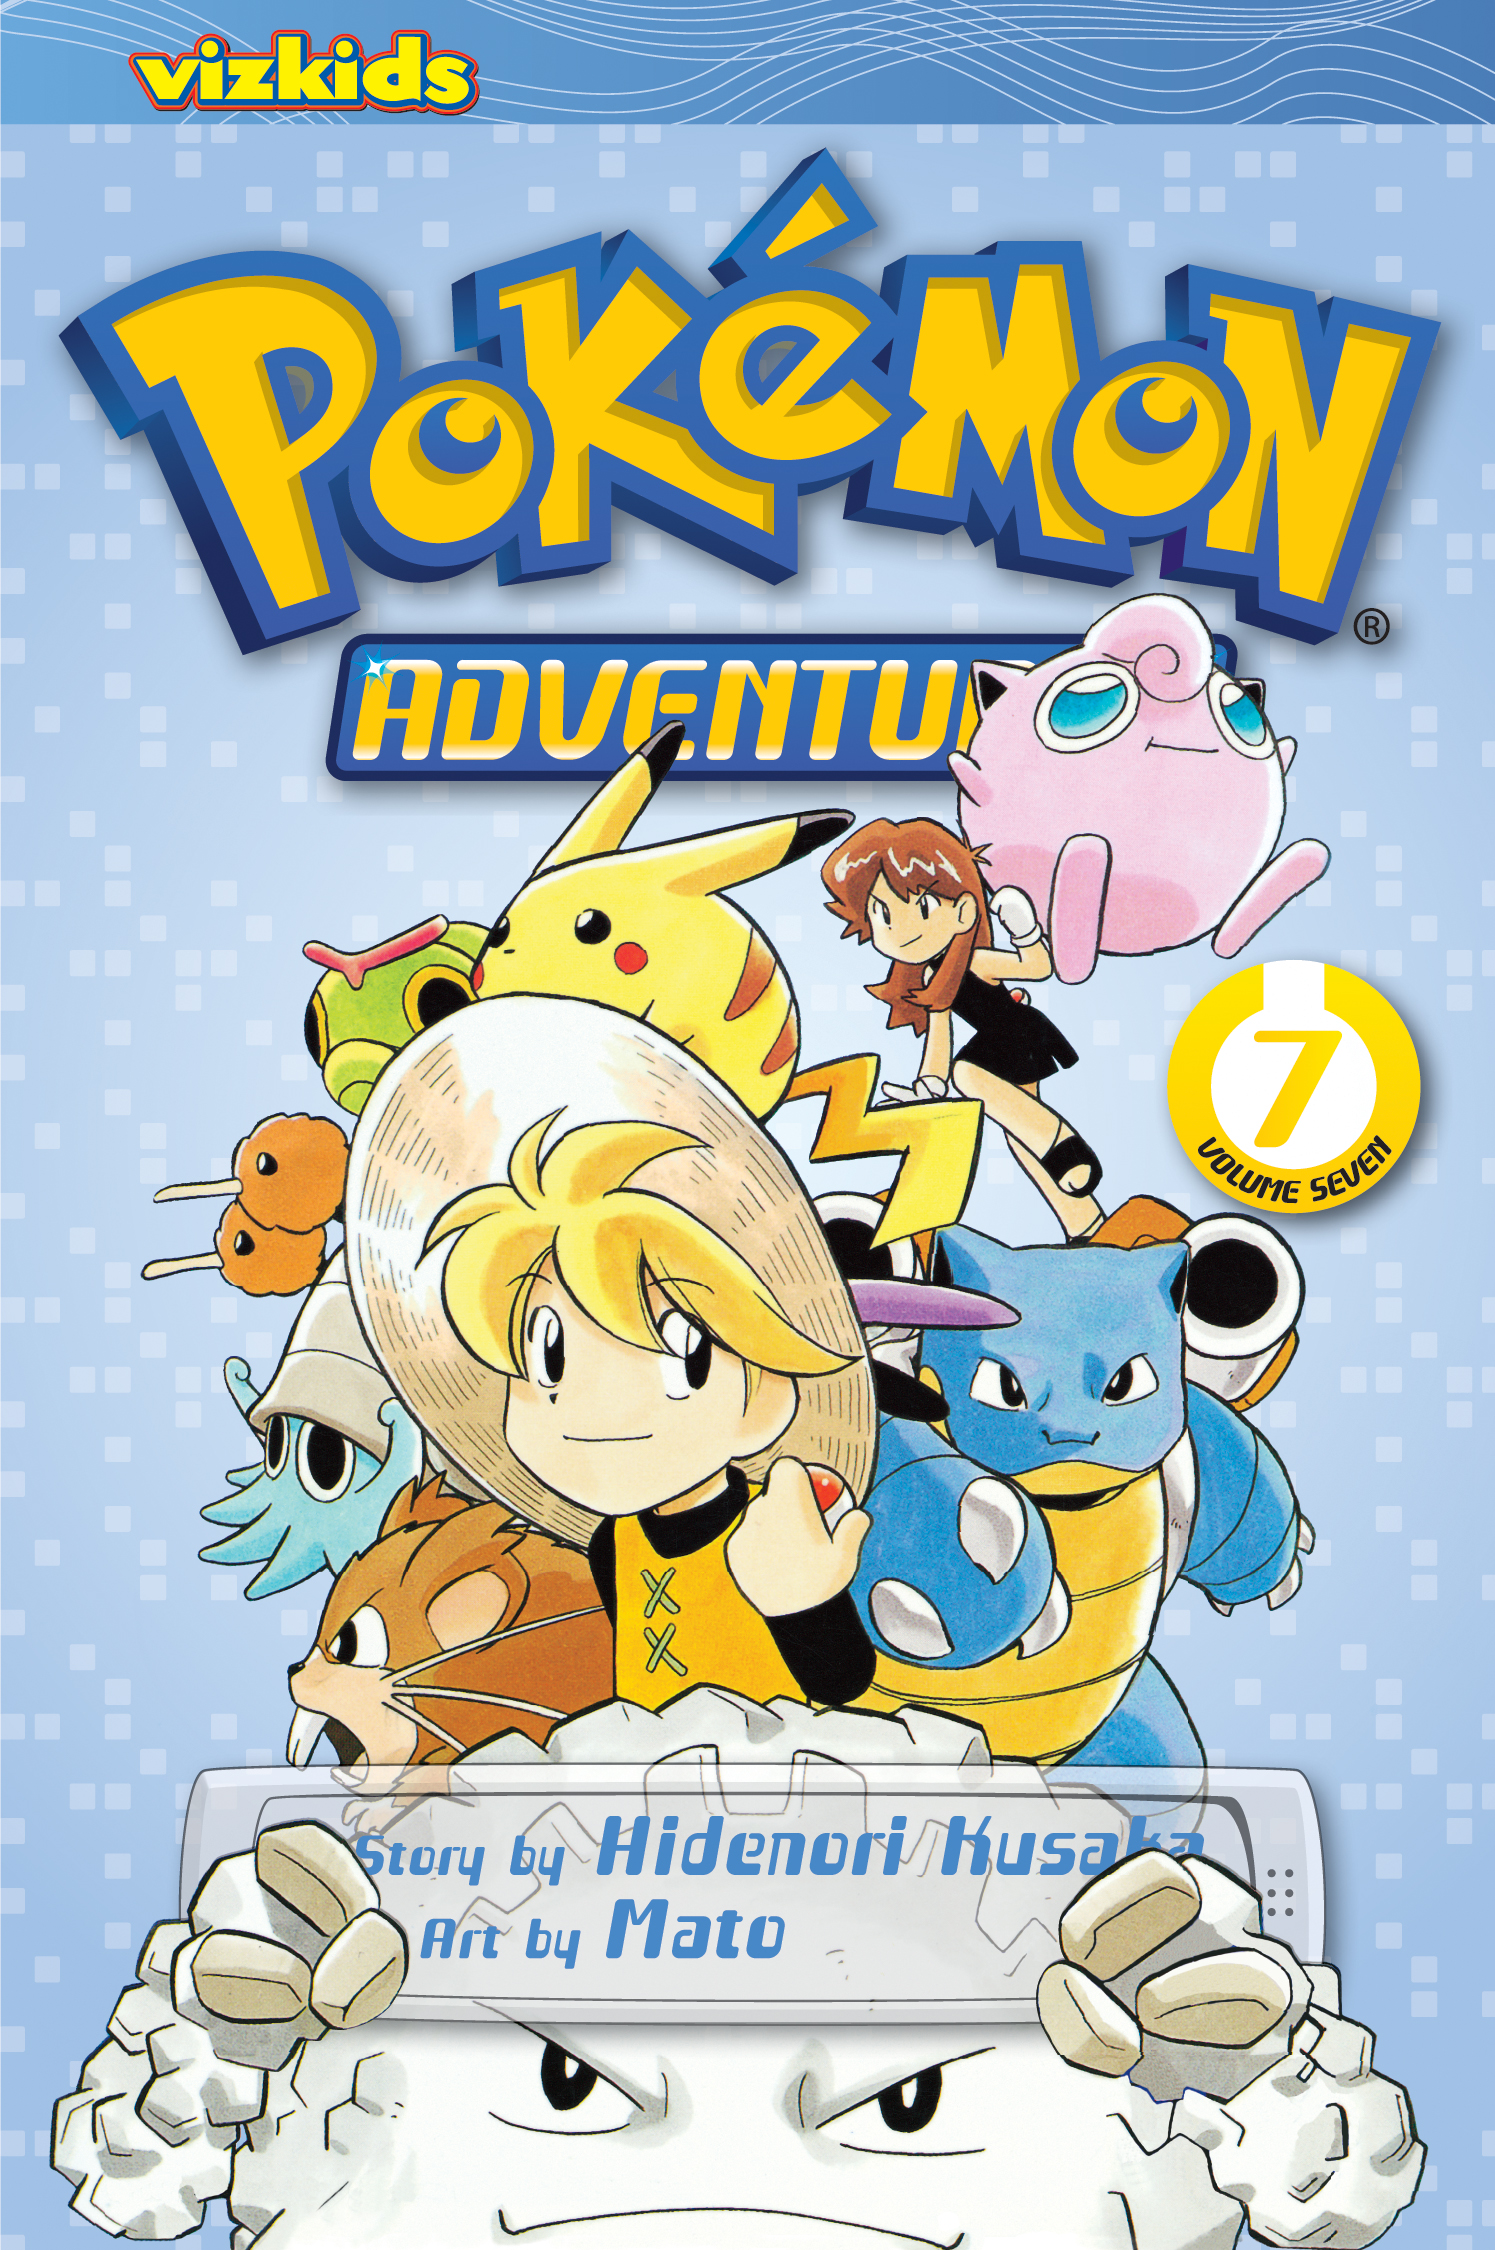 Updated Dream Remake For Pokémon Yellow